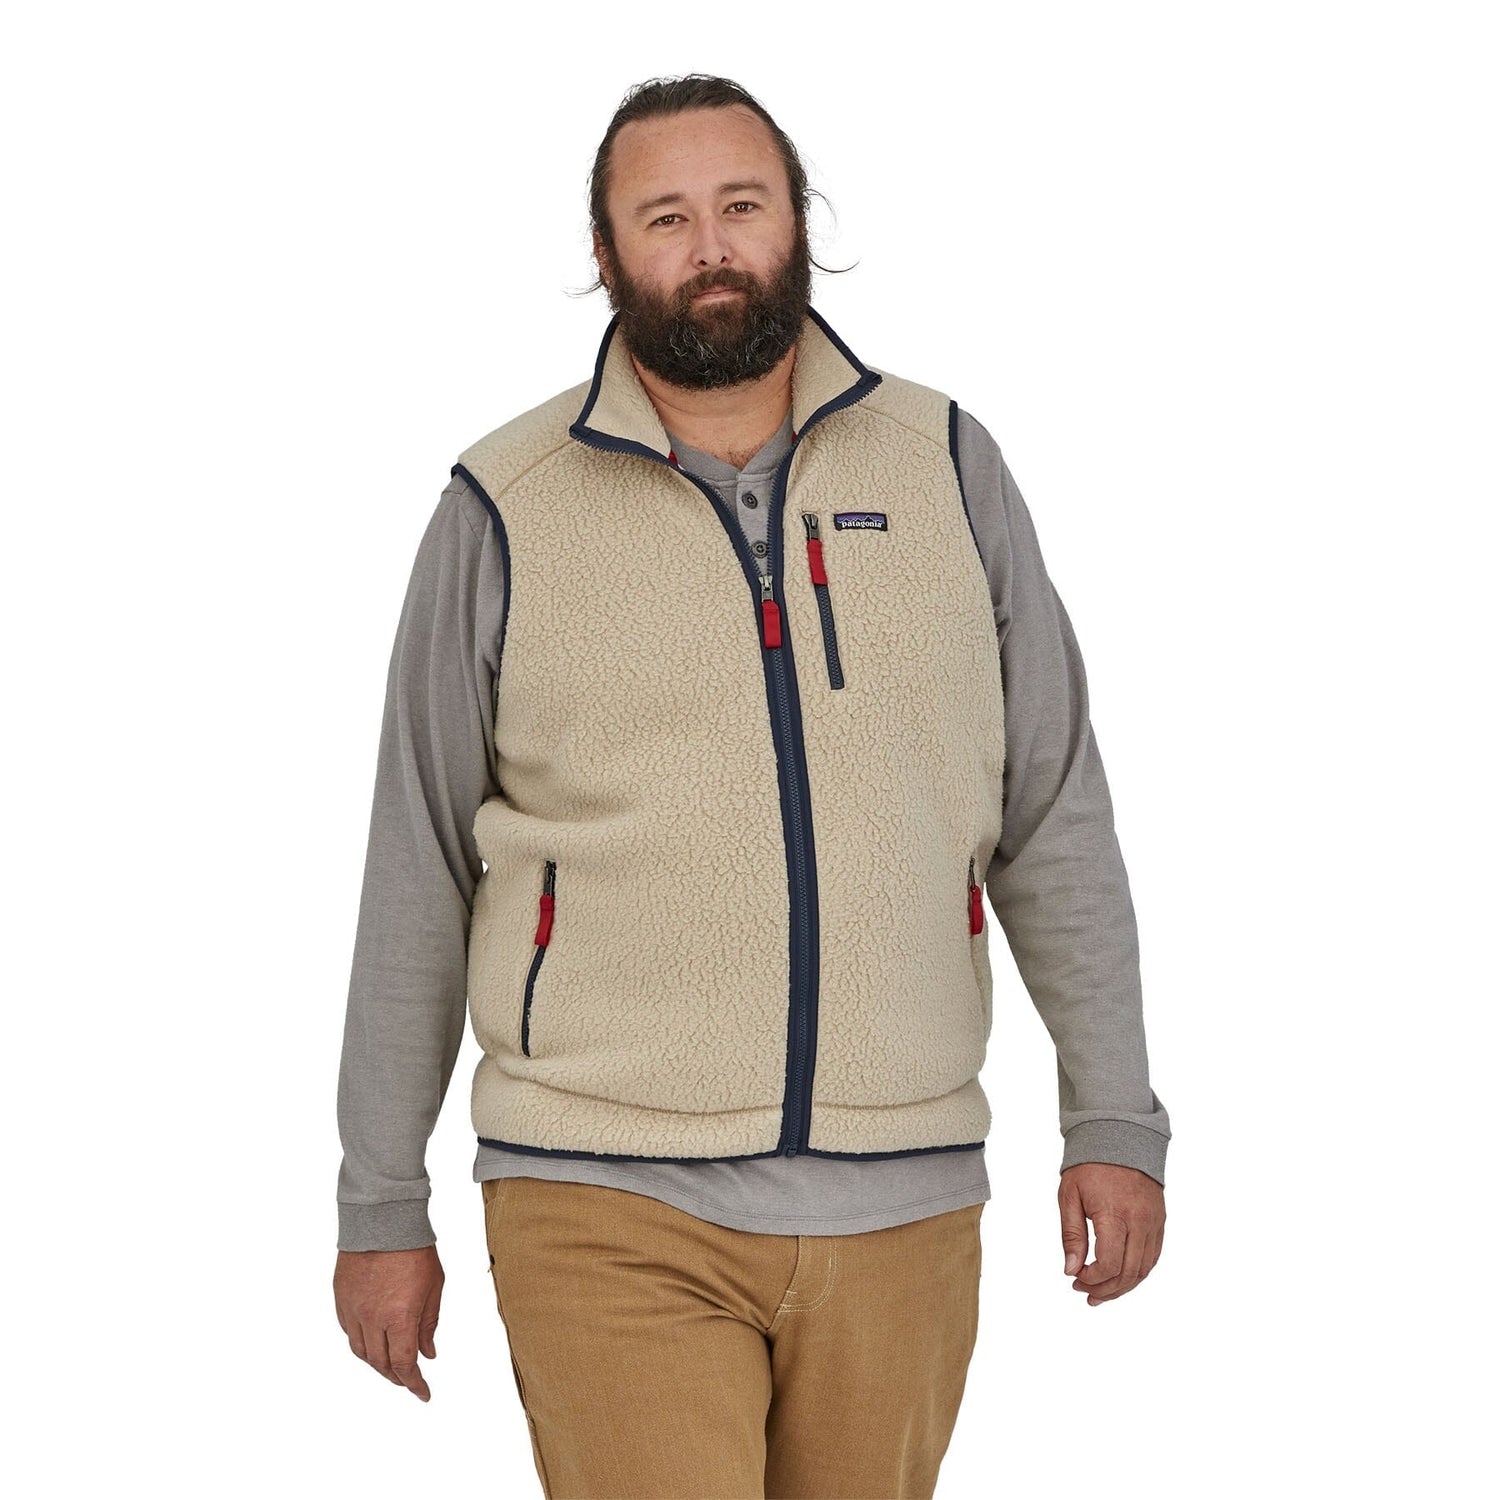 Patagonia - M's Retro Pile Vest - Recycled polyester - Weekendbee - sustainable sportswear